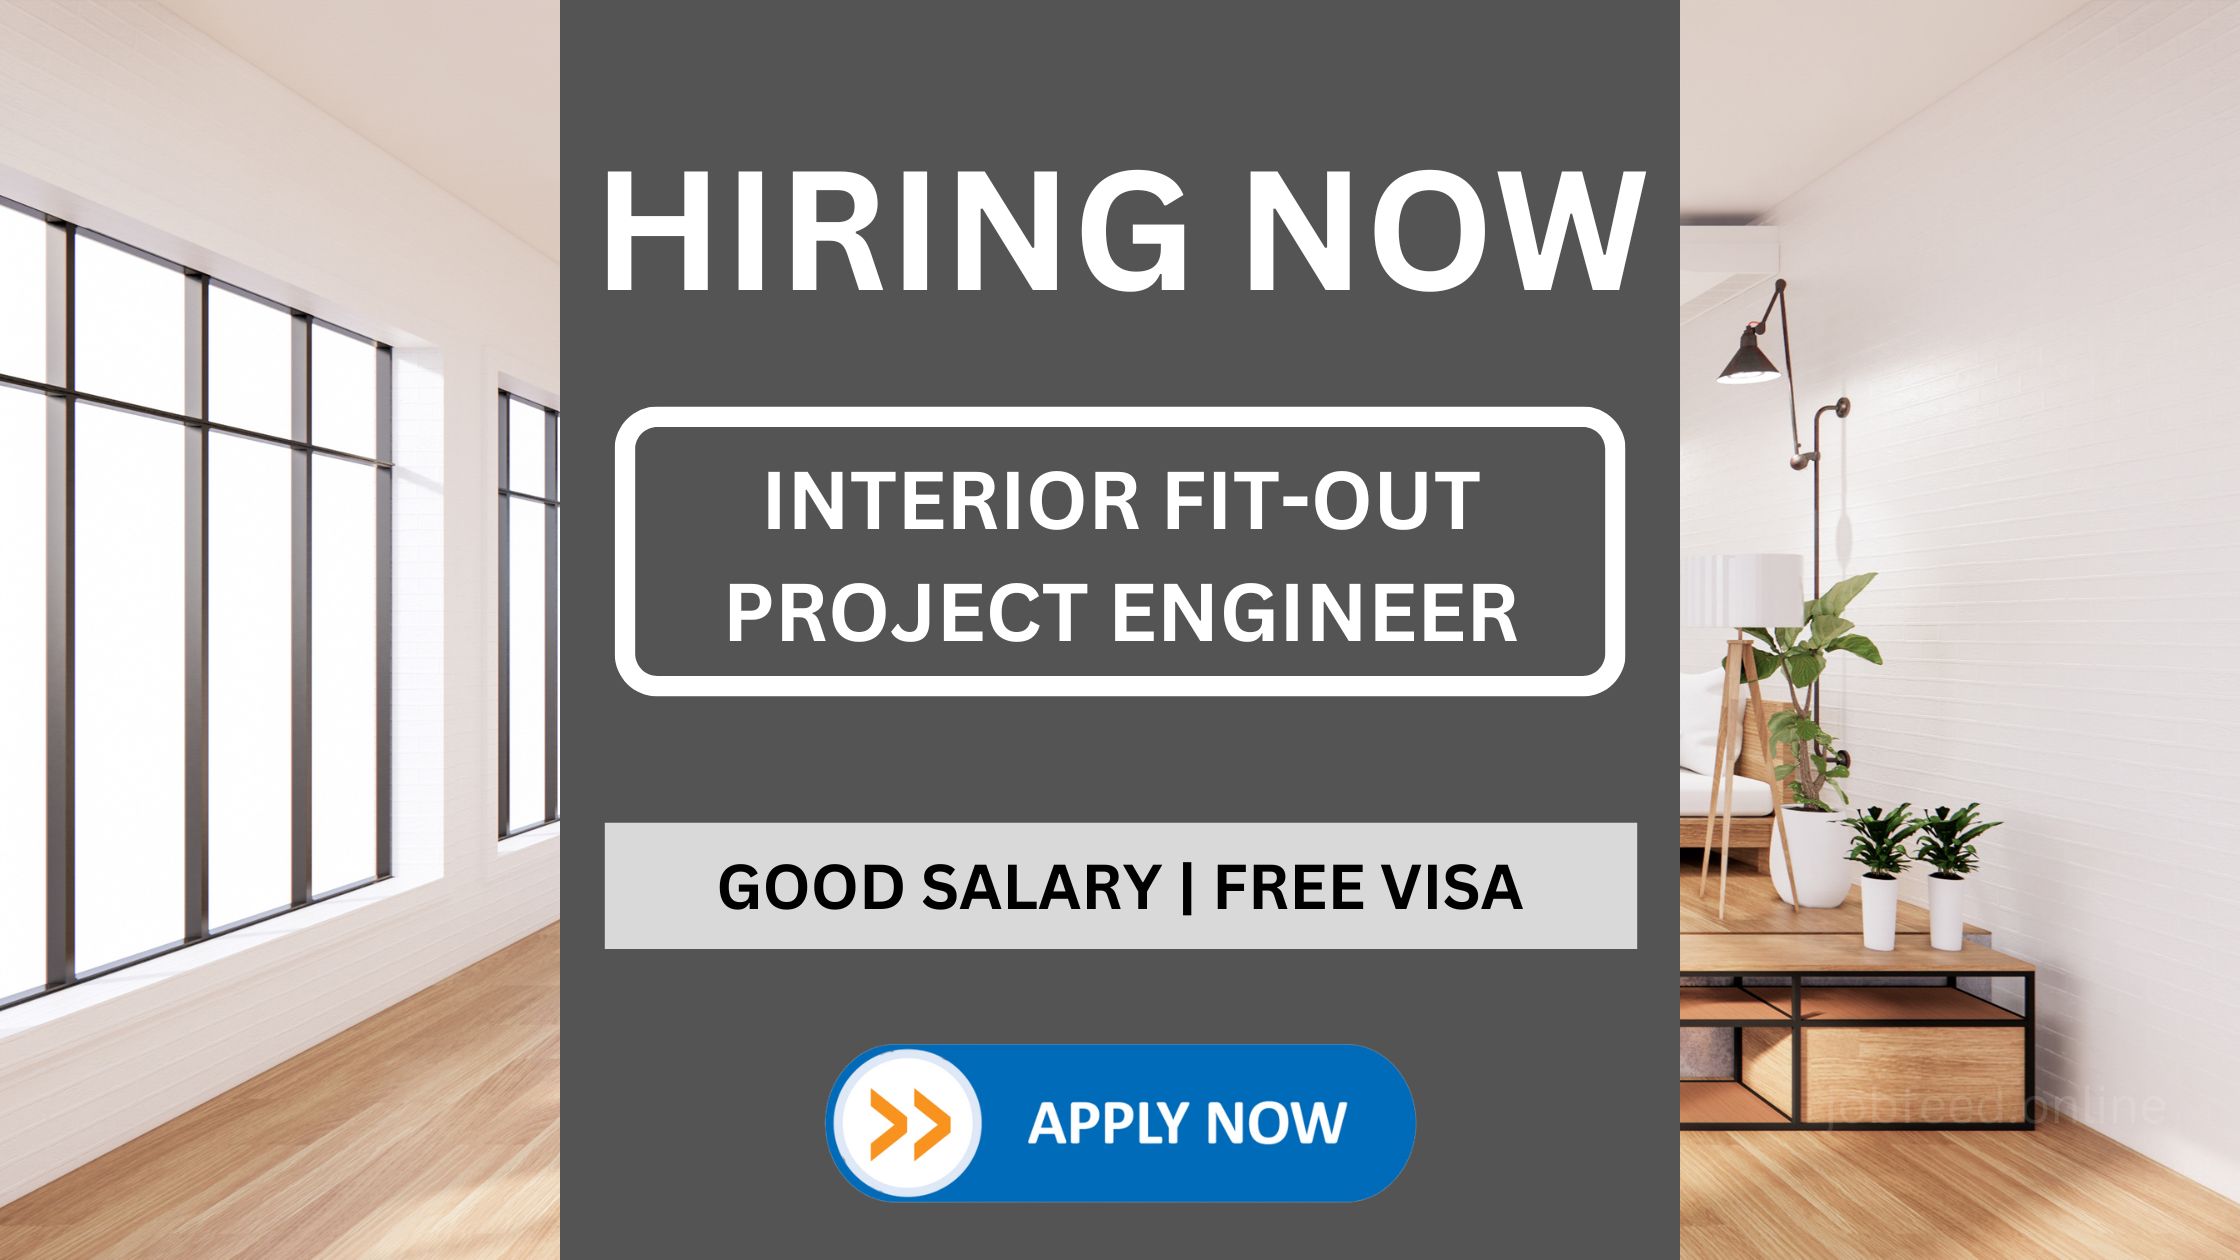 Interior Fit-out Project Engineer Vacancy - Check Requirement and Apply Online